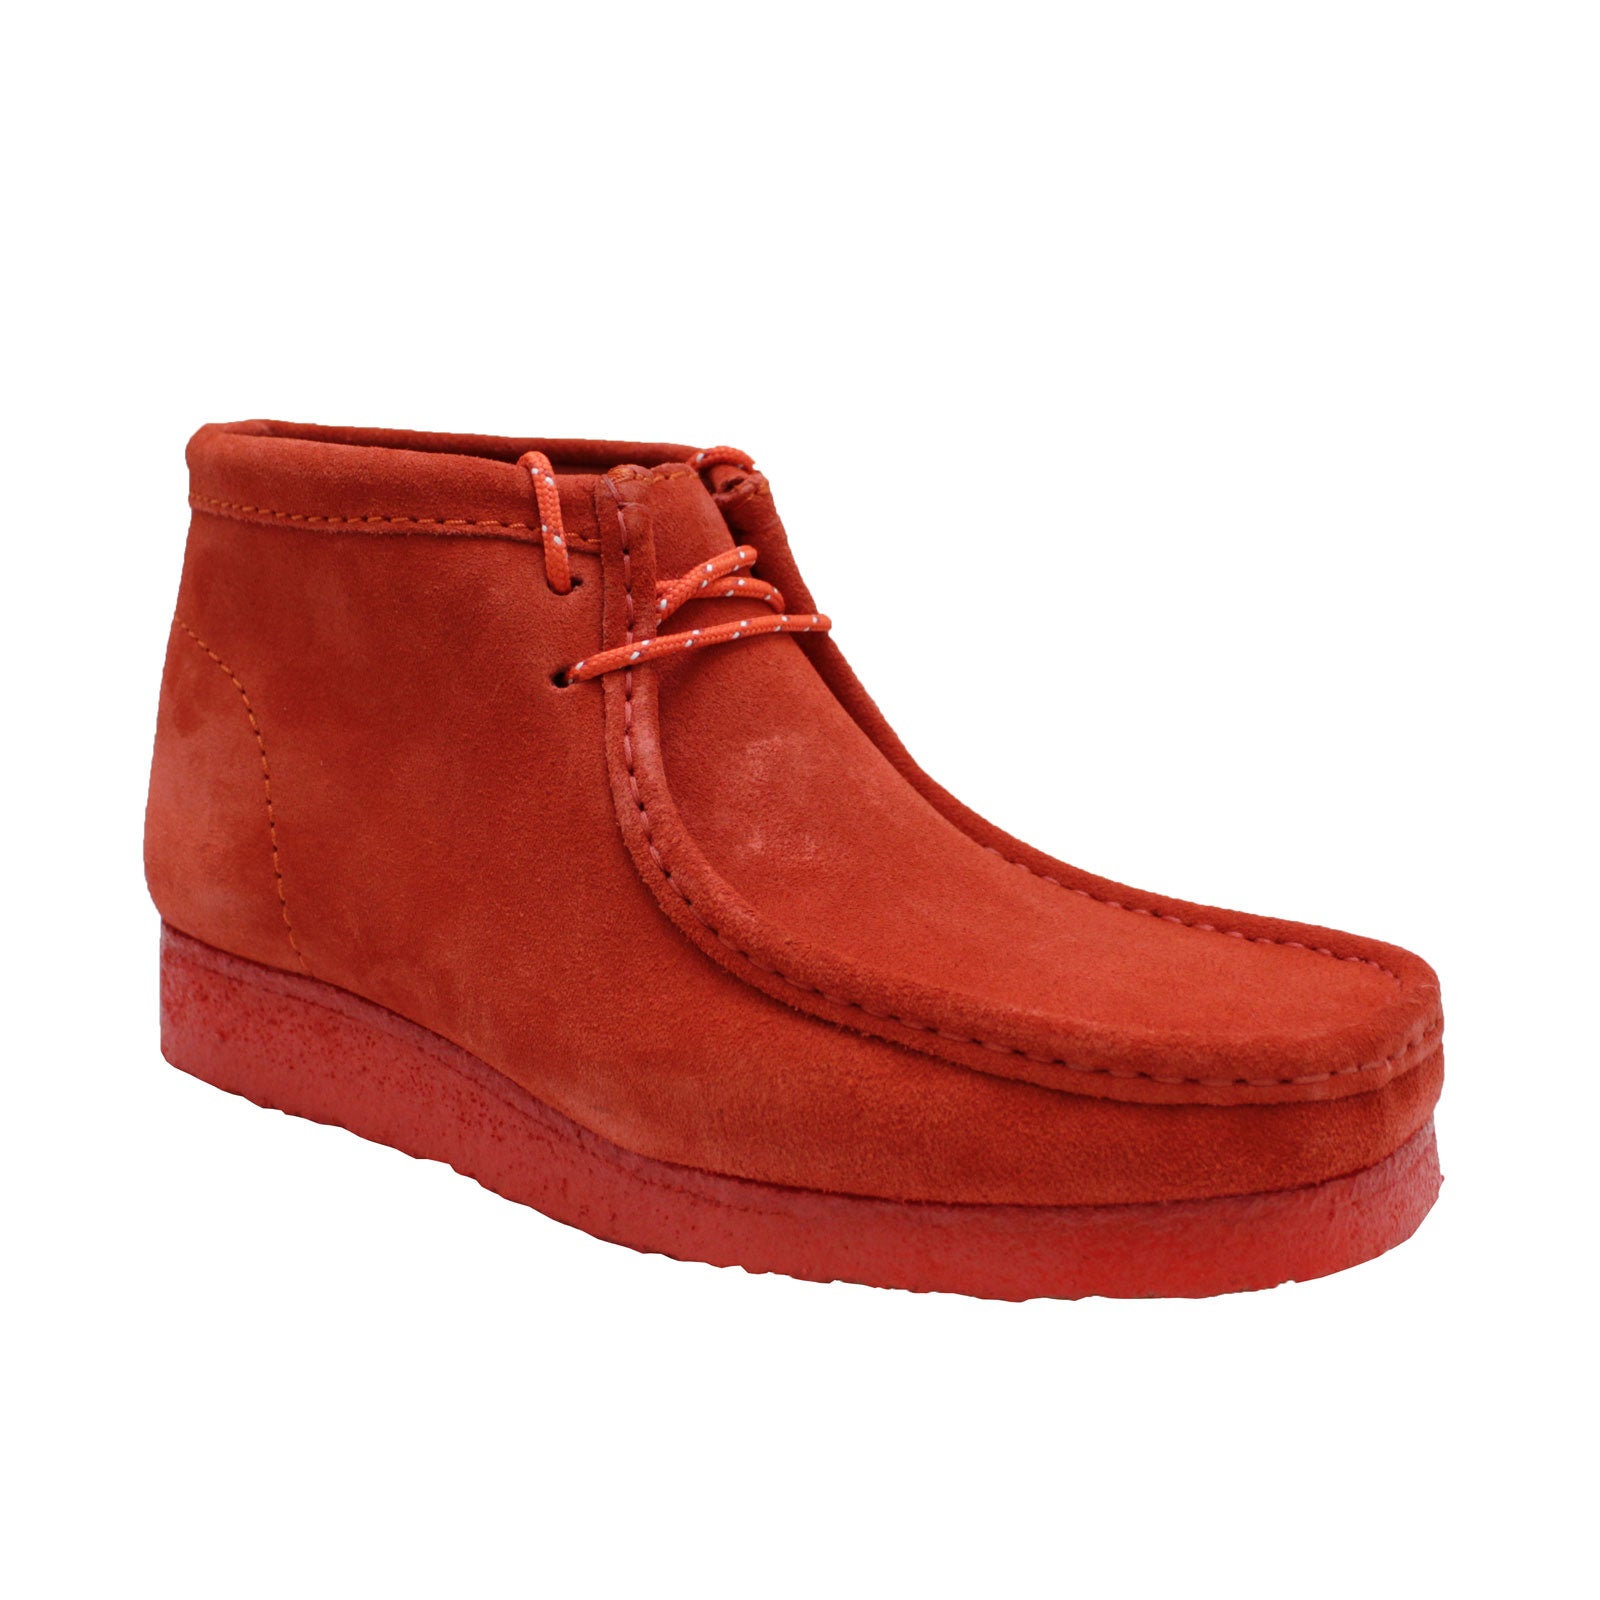 wallabees red